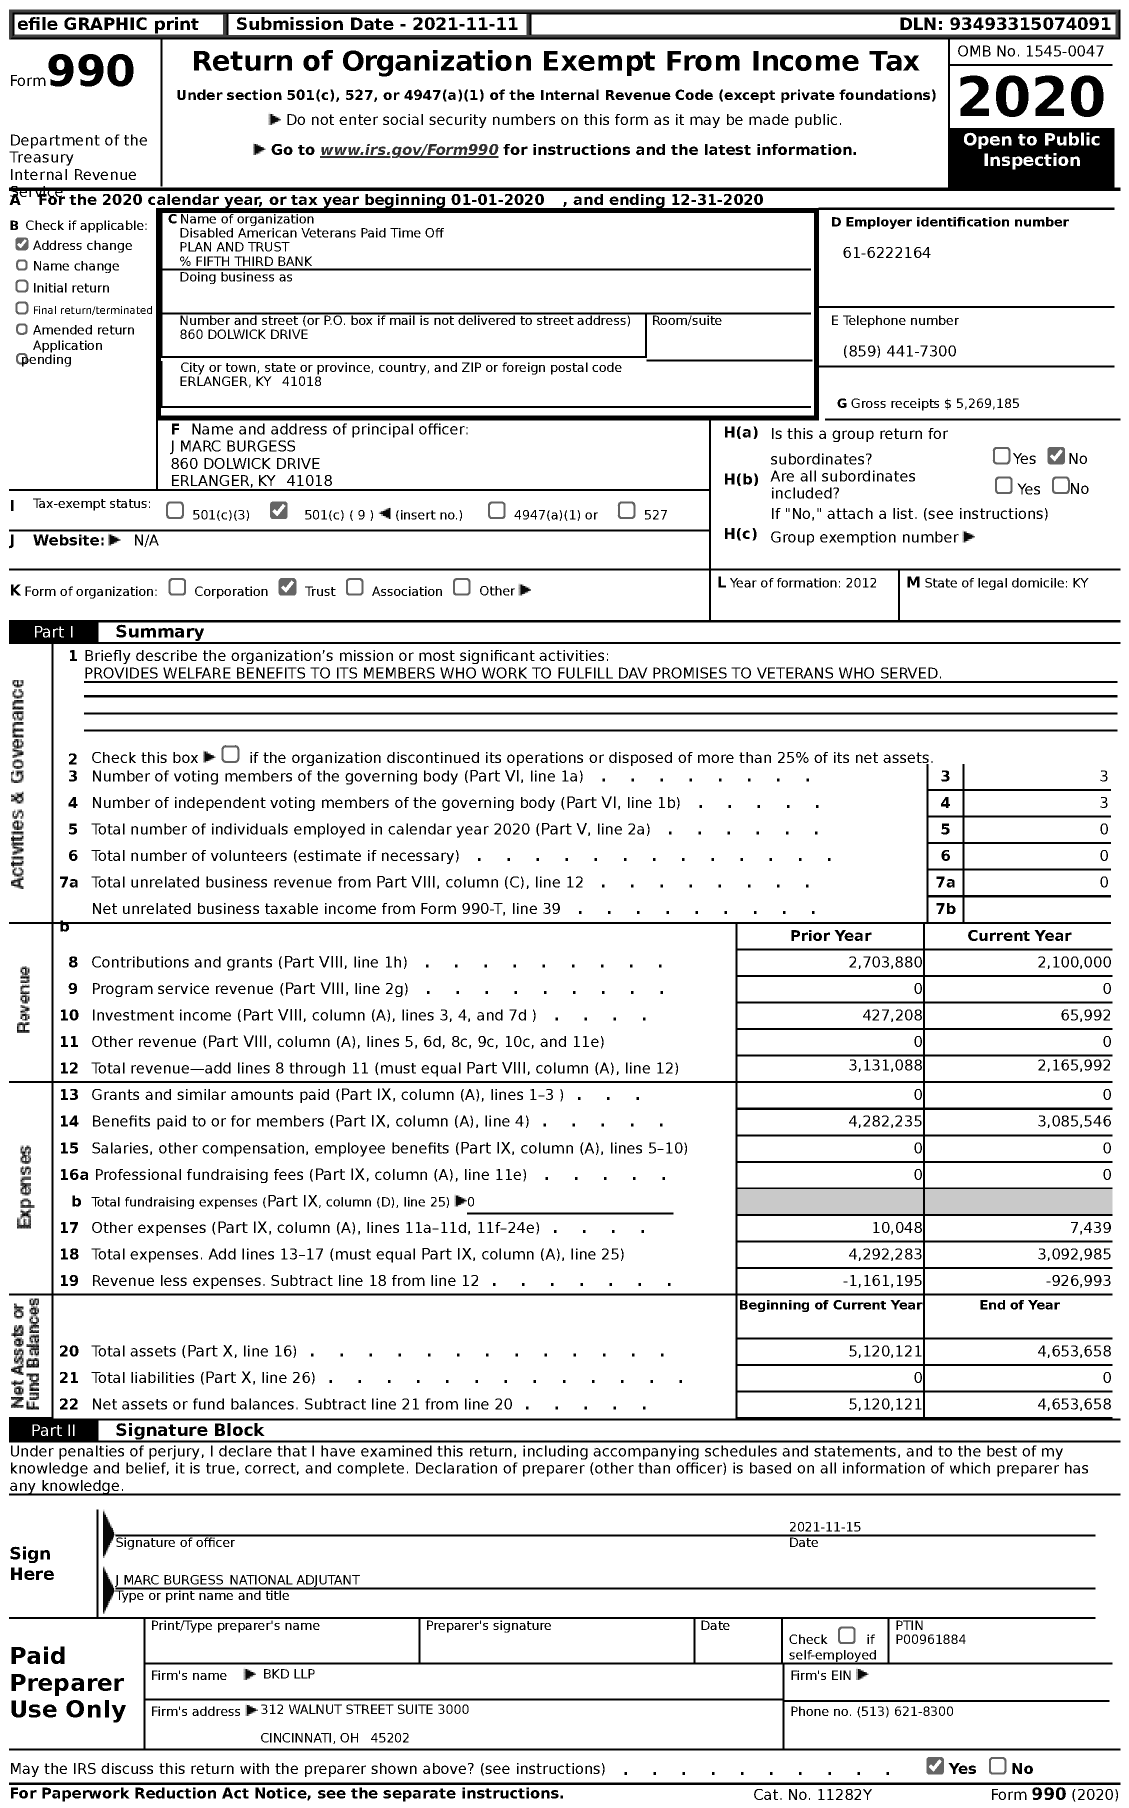 Image of first page of 2020 Form 990 for Disabled American Veterans Paid Time Off PLAN AND TRUST